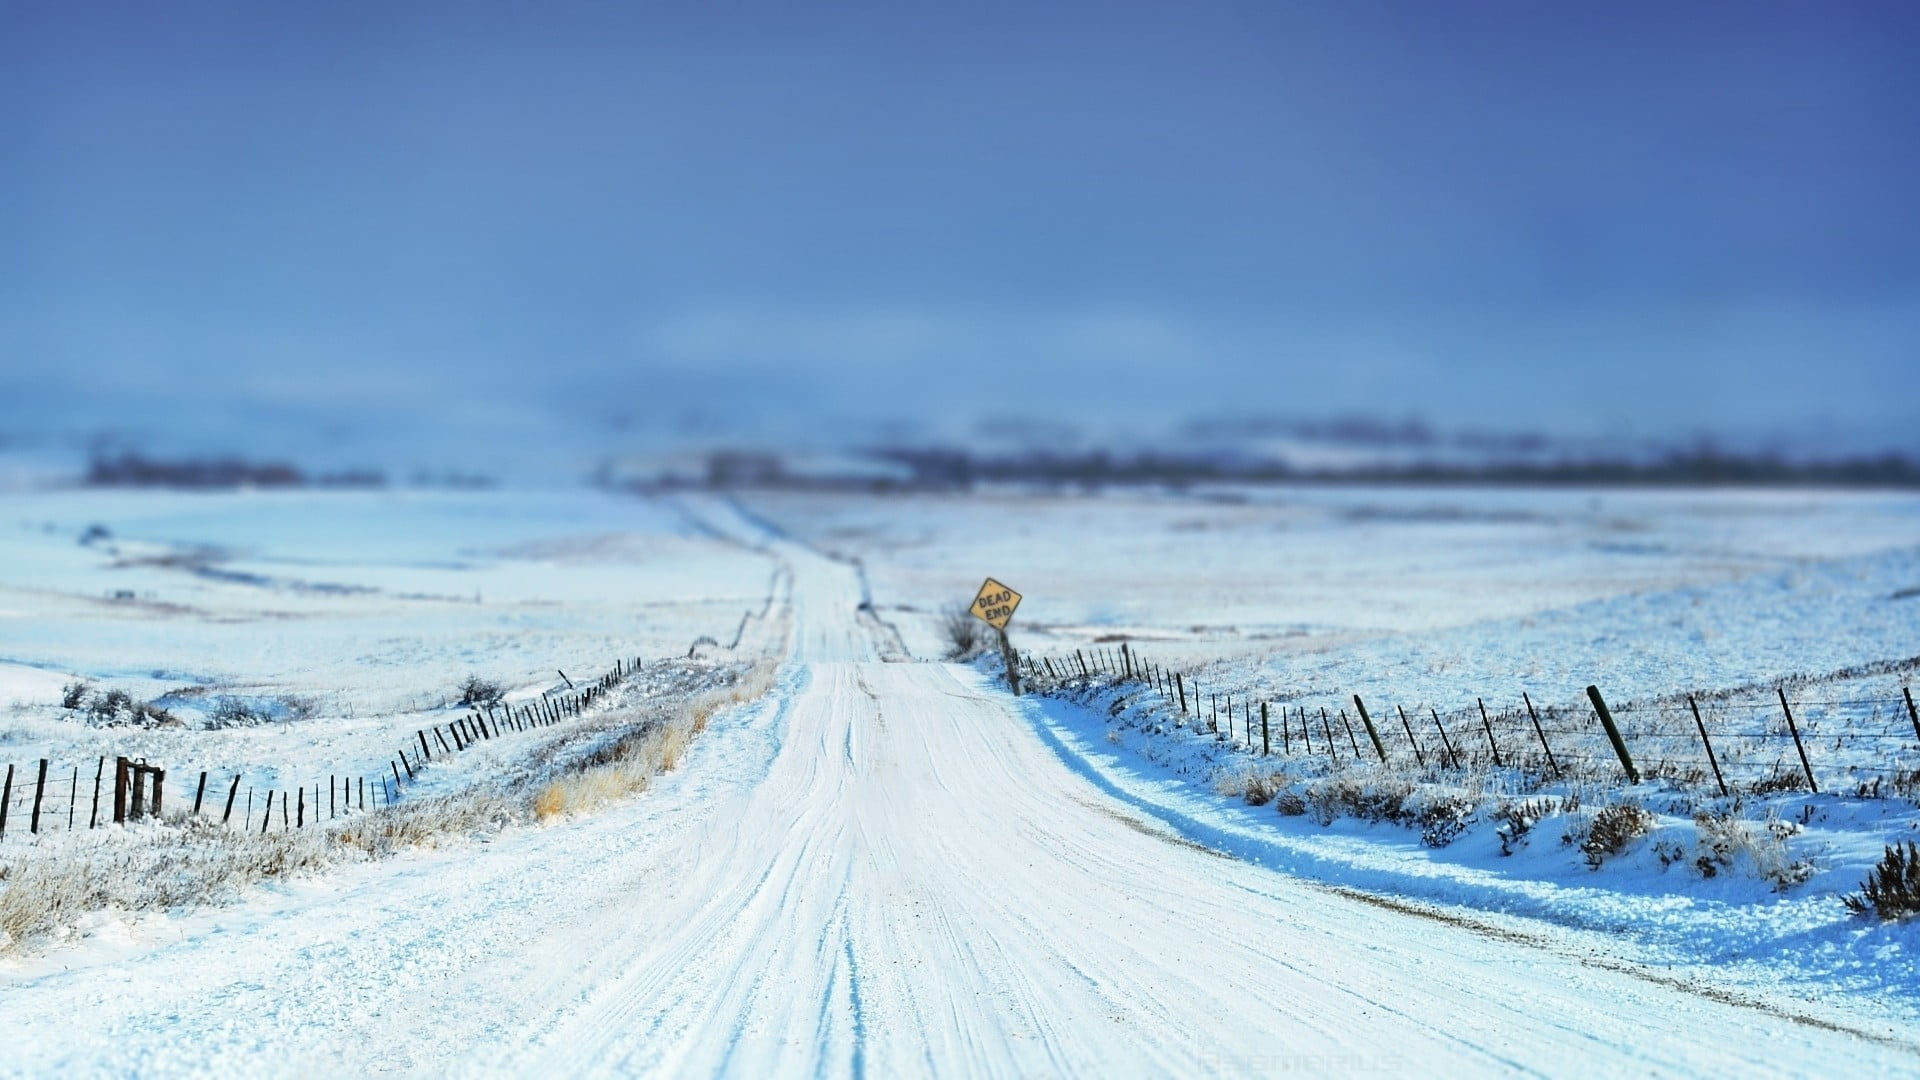 dirt road covered by snow, tilt shift, winter, signs, fence, landscape